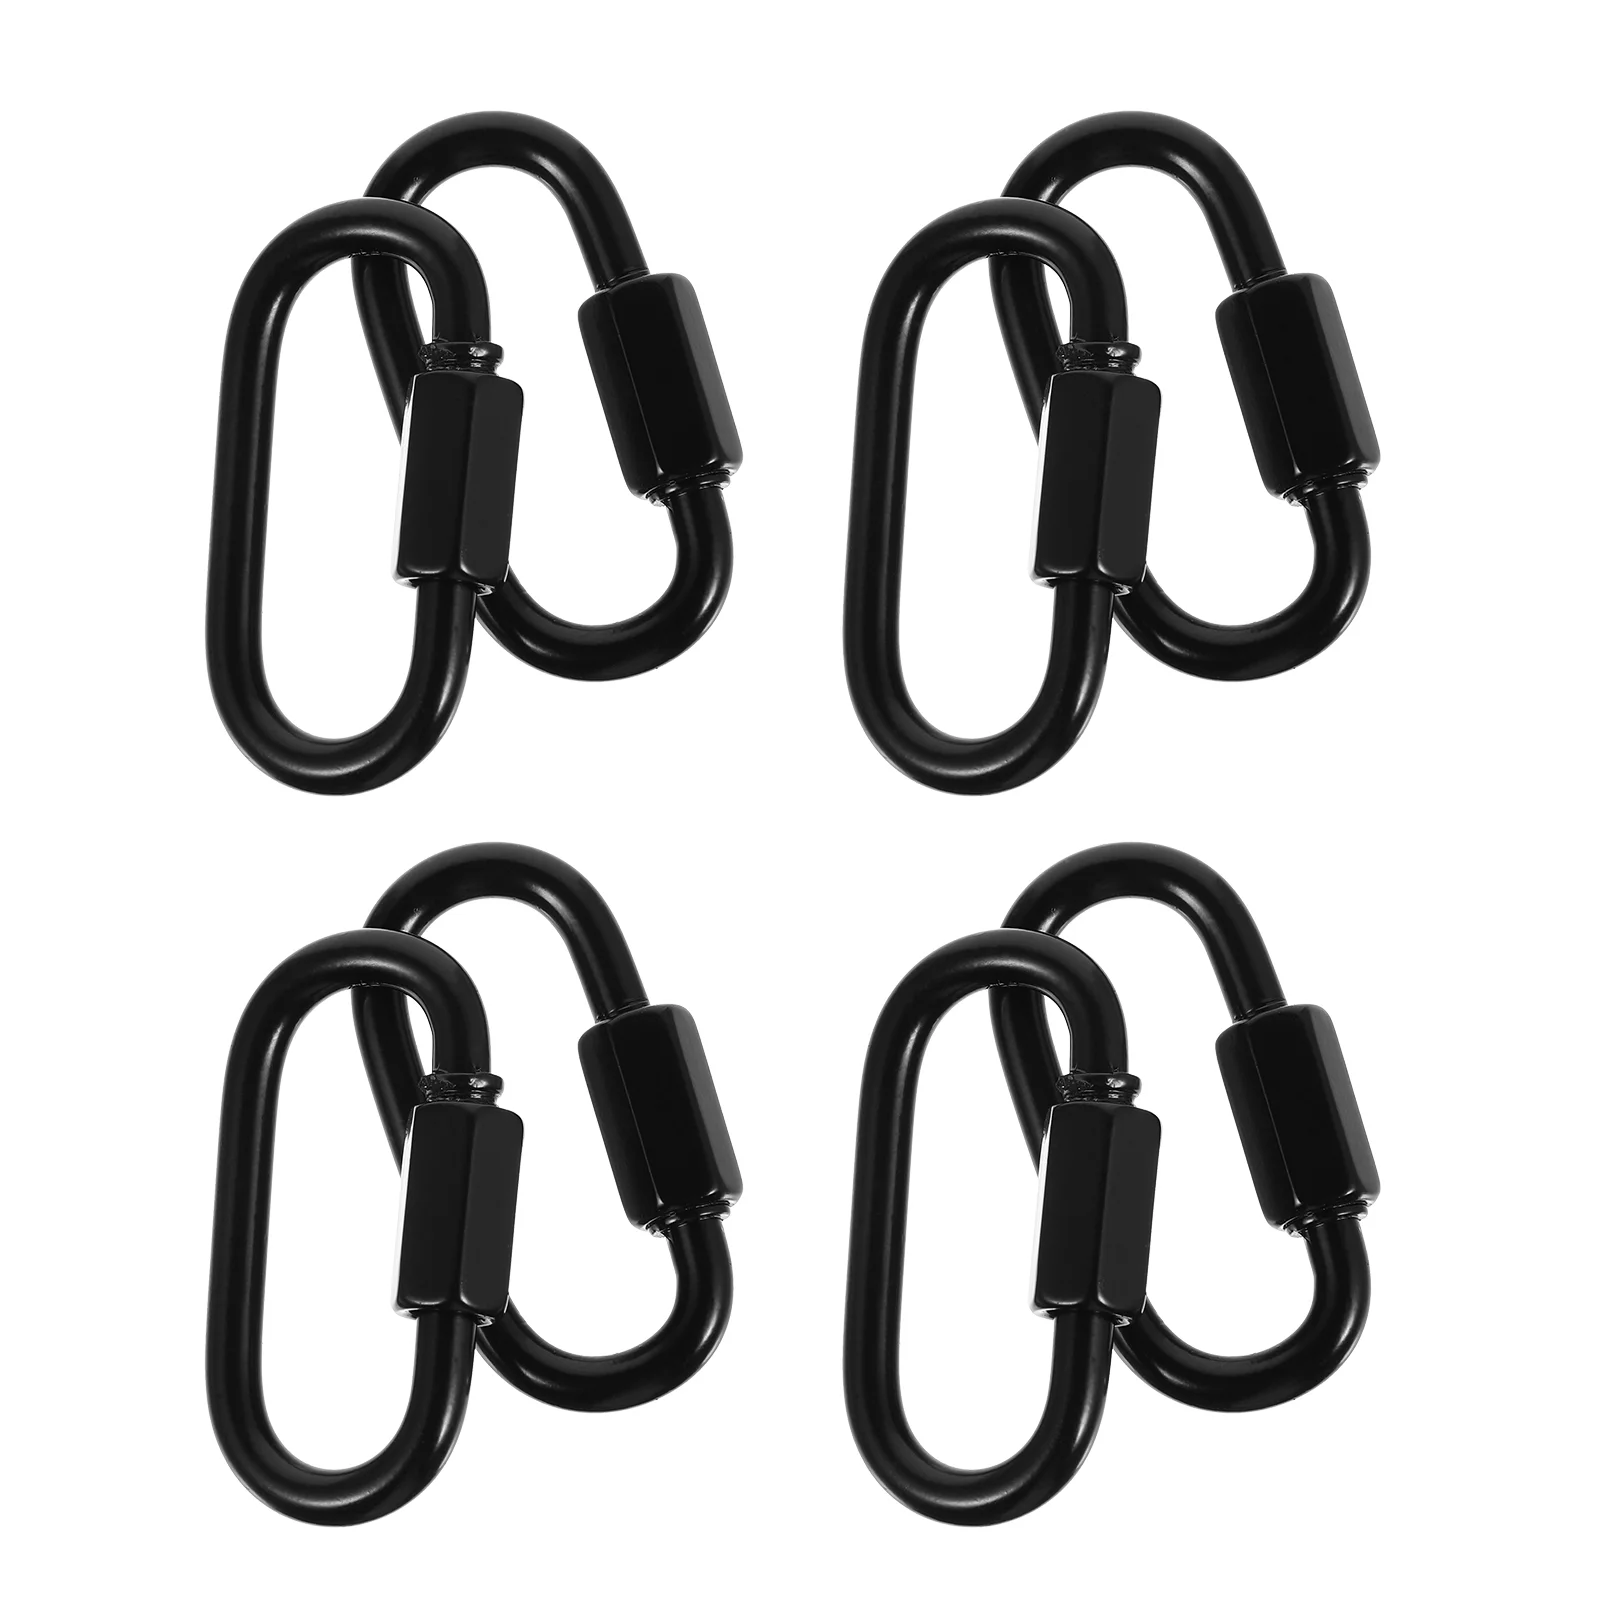 

8 Pcs Carabiner Trailer Connector Chain Connectors Lifting Hooks Iron Rope Quick Link Links Safety Locking